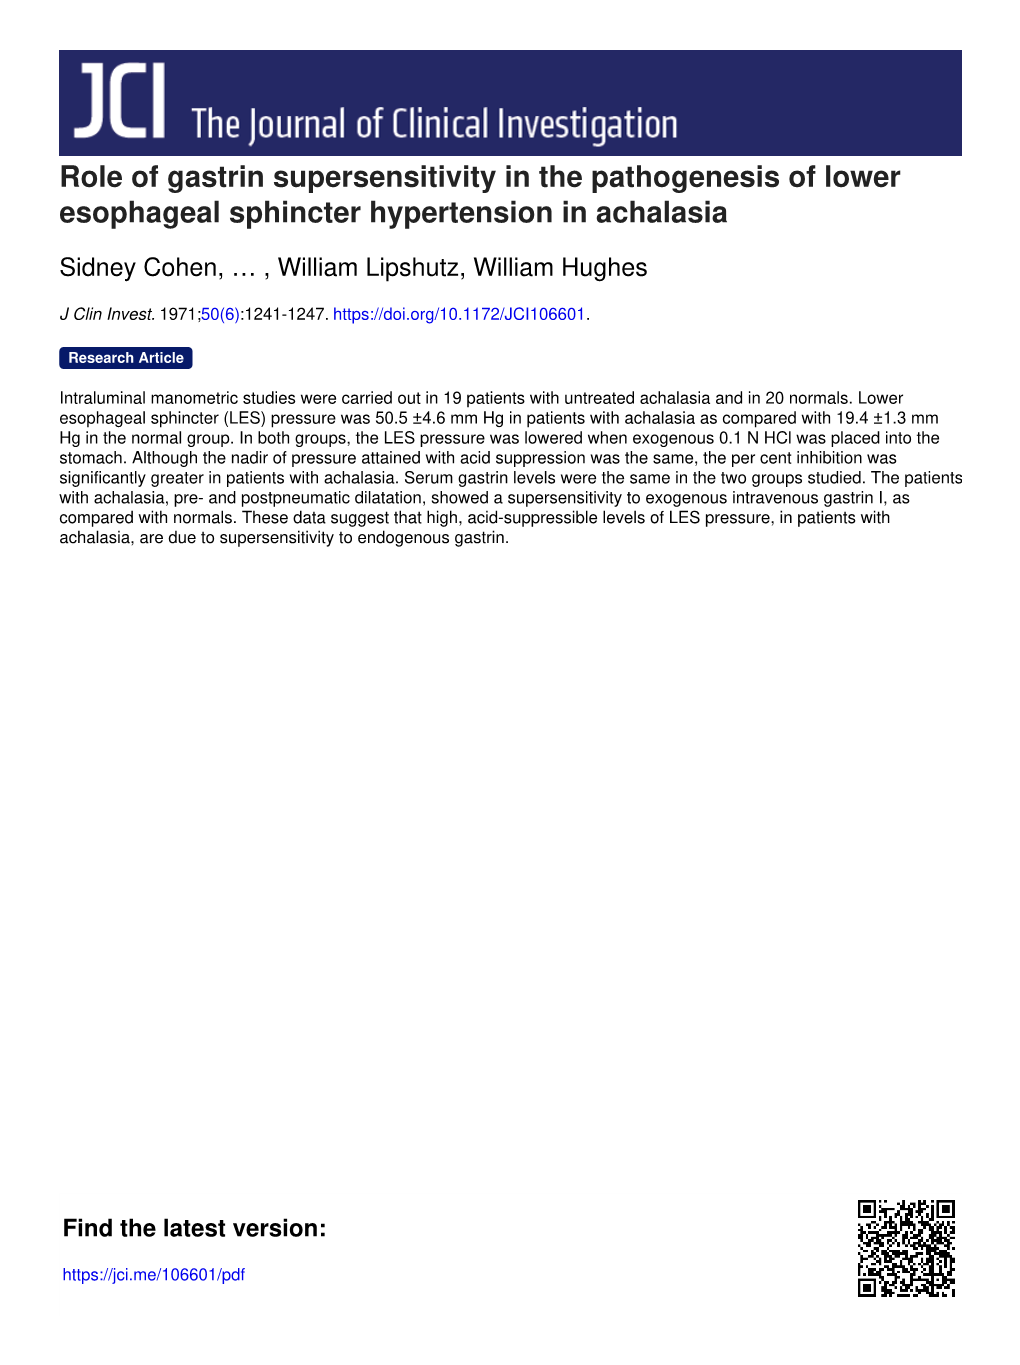 Role of Gastrin Supersensitivity in the Pathogenesis of Lower Esophageal Sphincter Hypertension in Achalasia